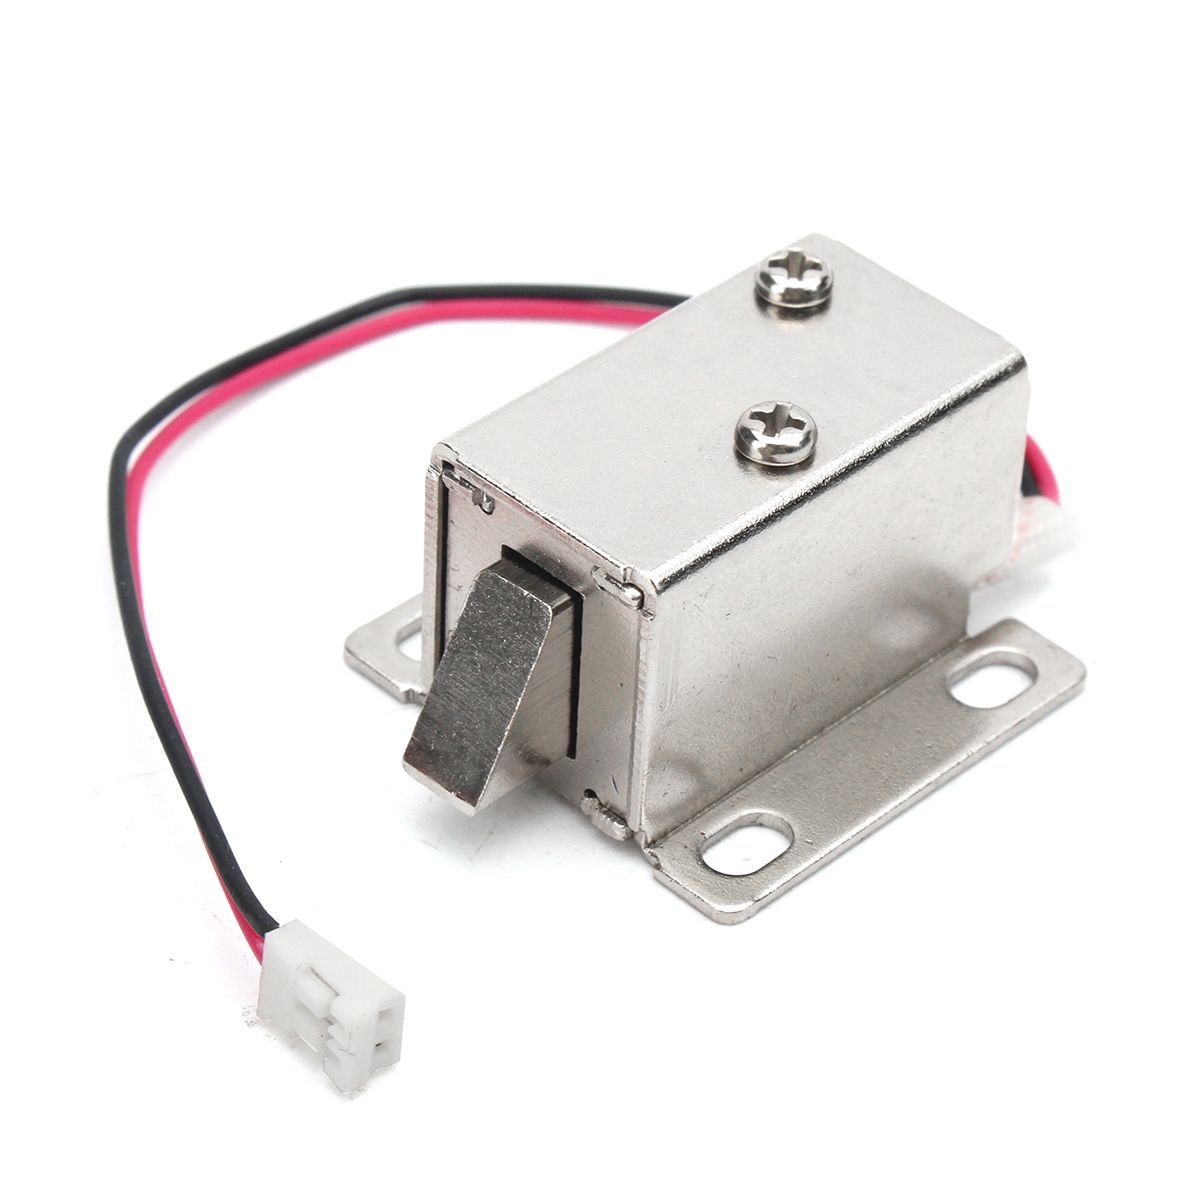 12V-034A-Electronic-Lock-Catch-Electric-Release-Assembly-Solenoid-for-Door-Gate-Drawer-1144136